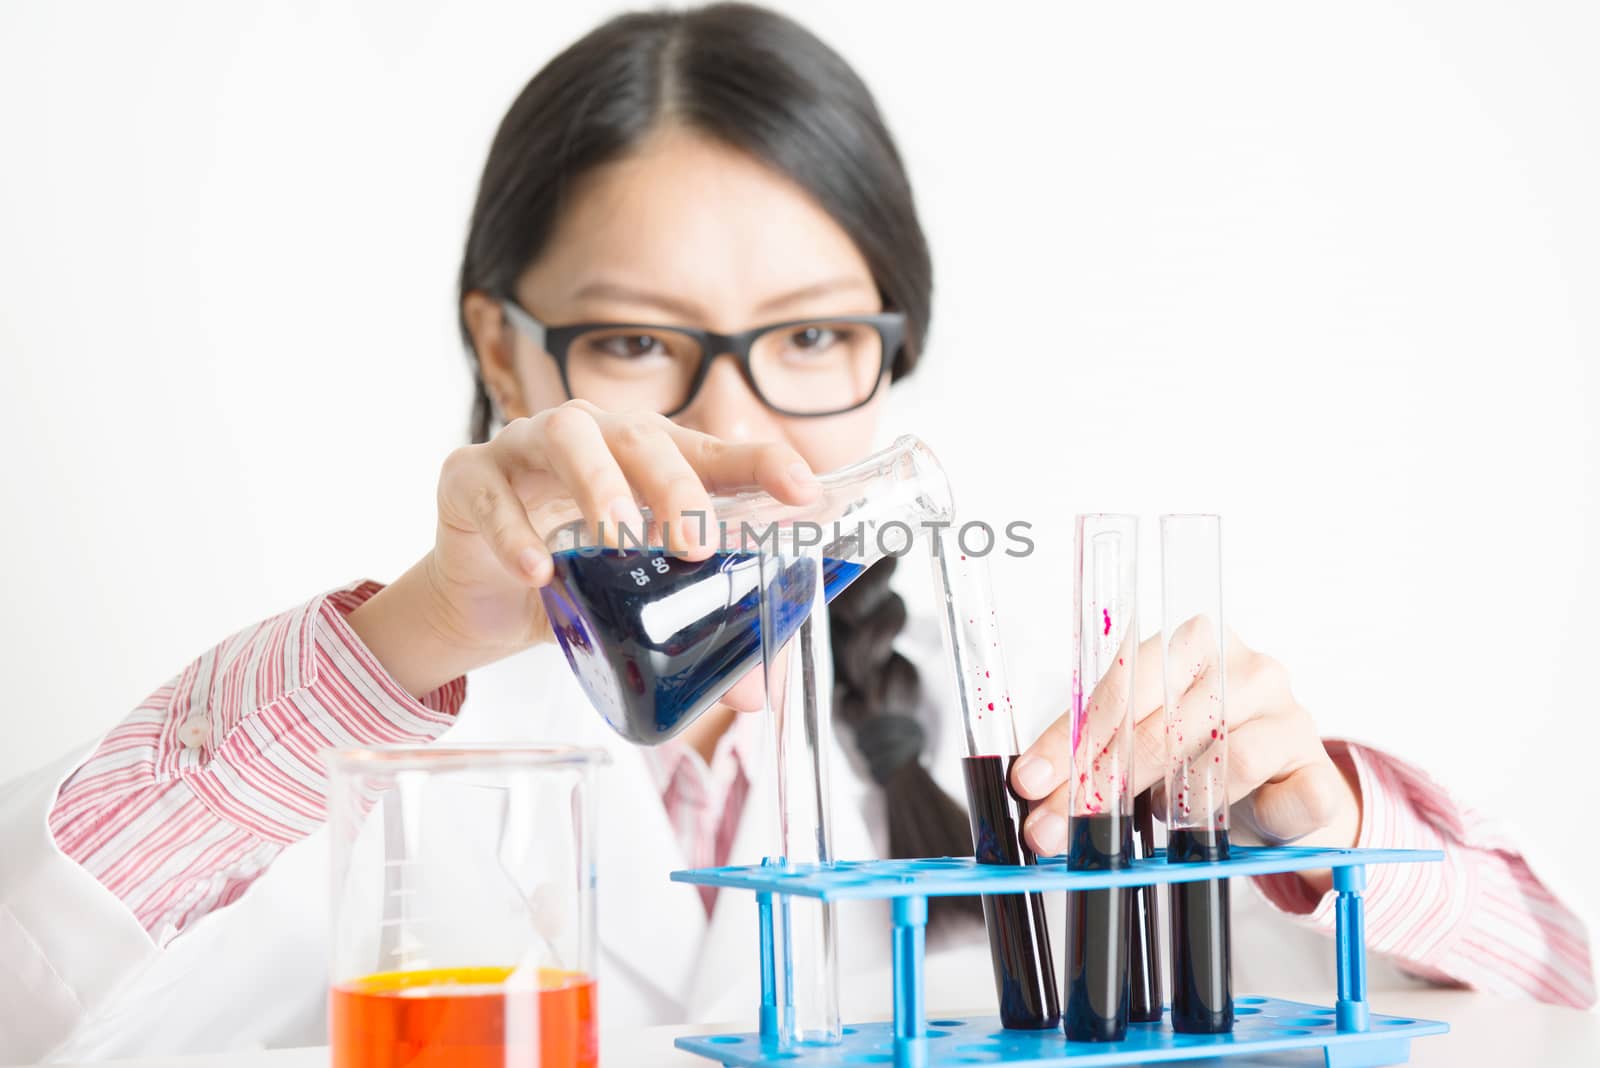 Young female researcher carrying out scientific research in a lab.